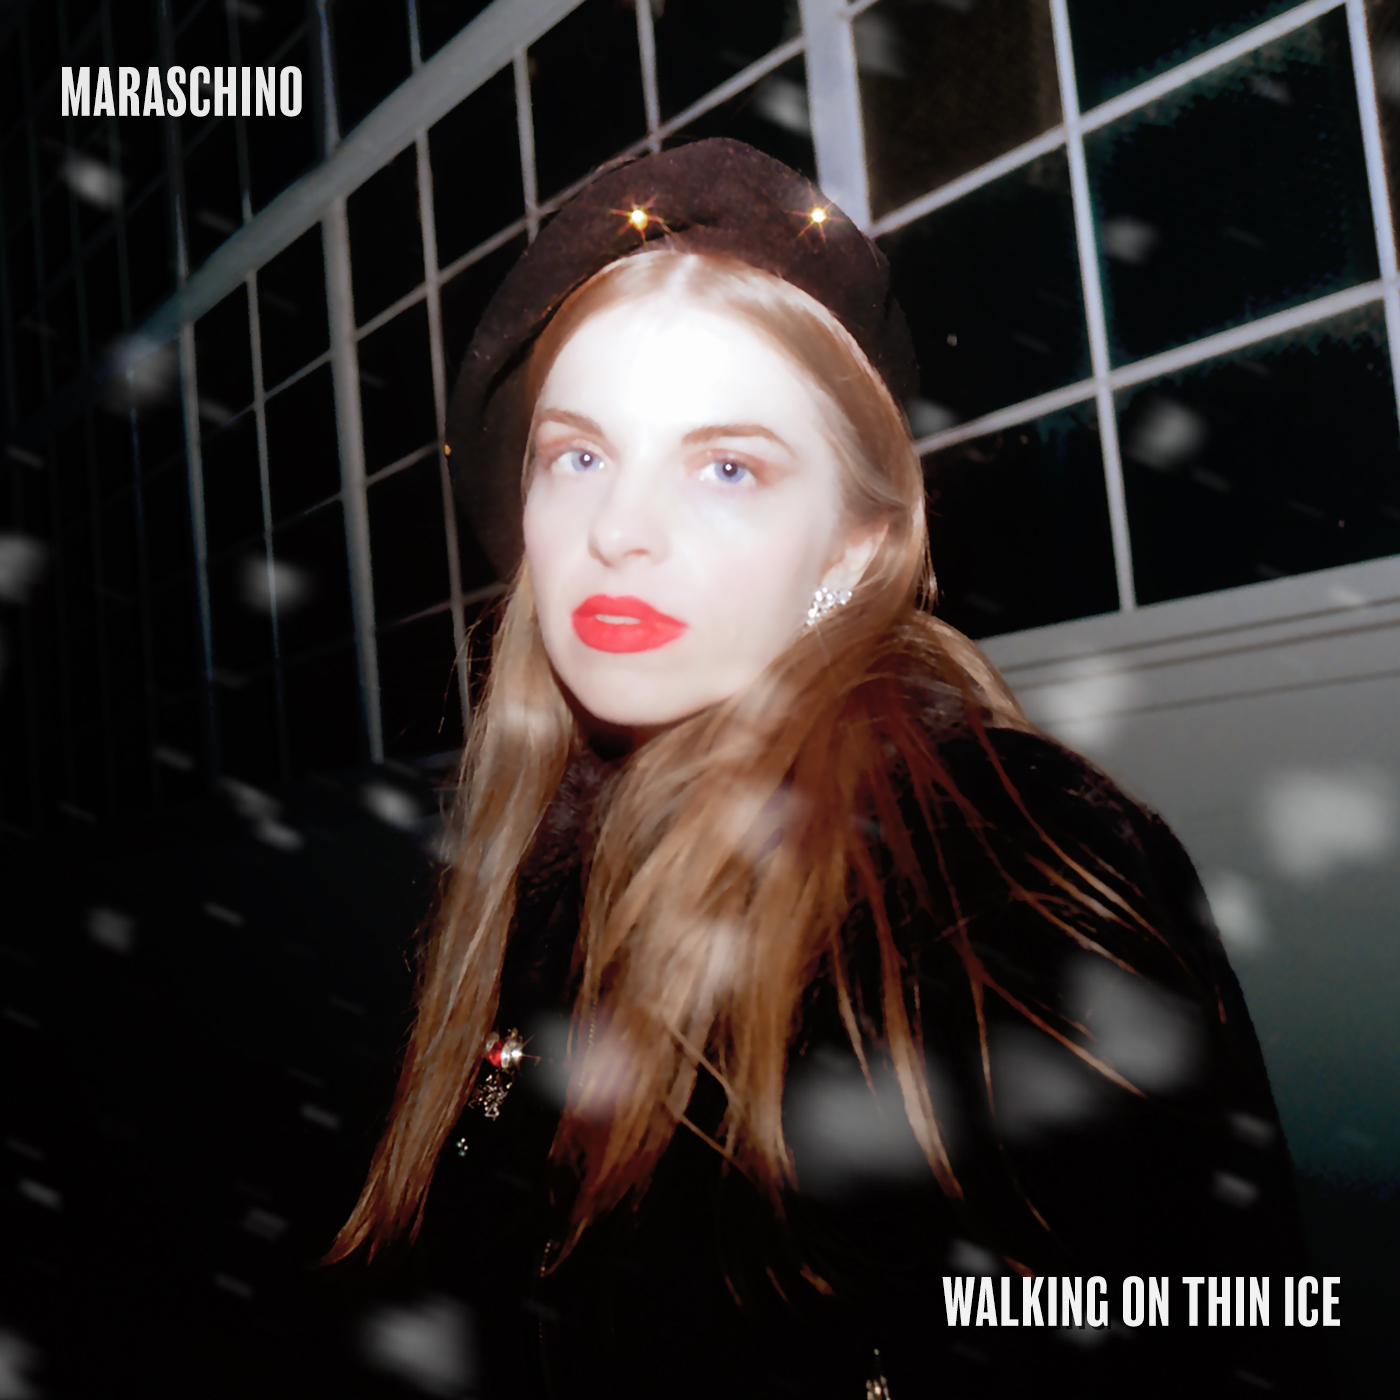 Maraschino shares a cover of Yoko Ono’s synth pop classic, “Walking On Thin Ice”